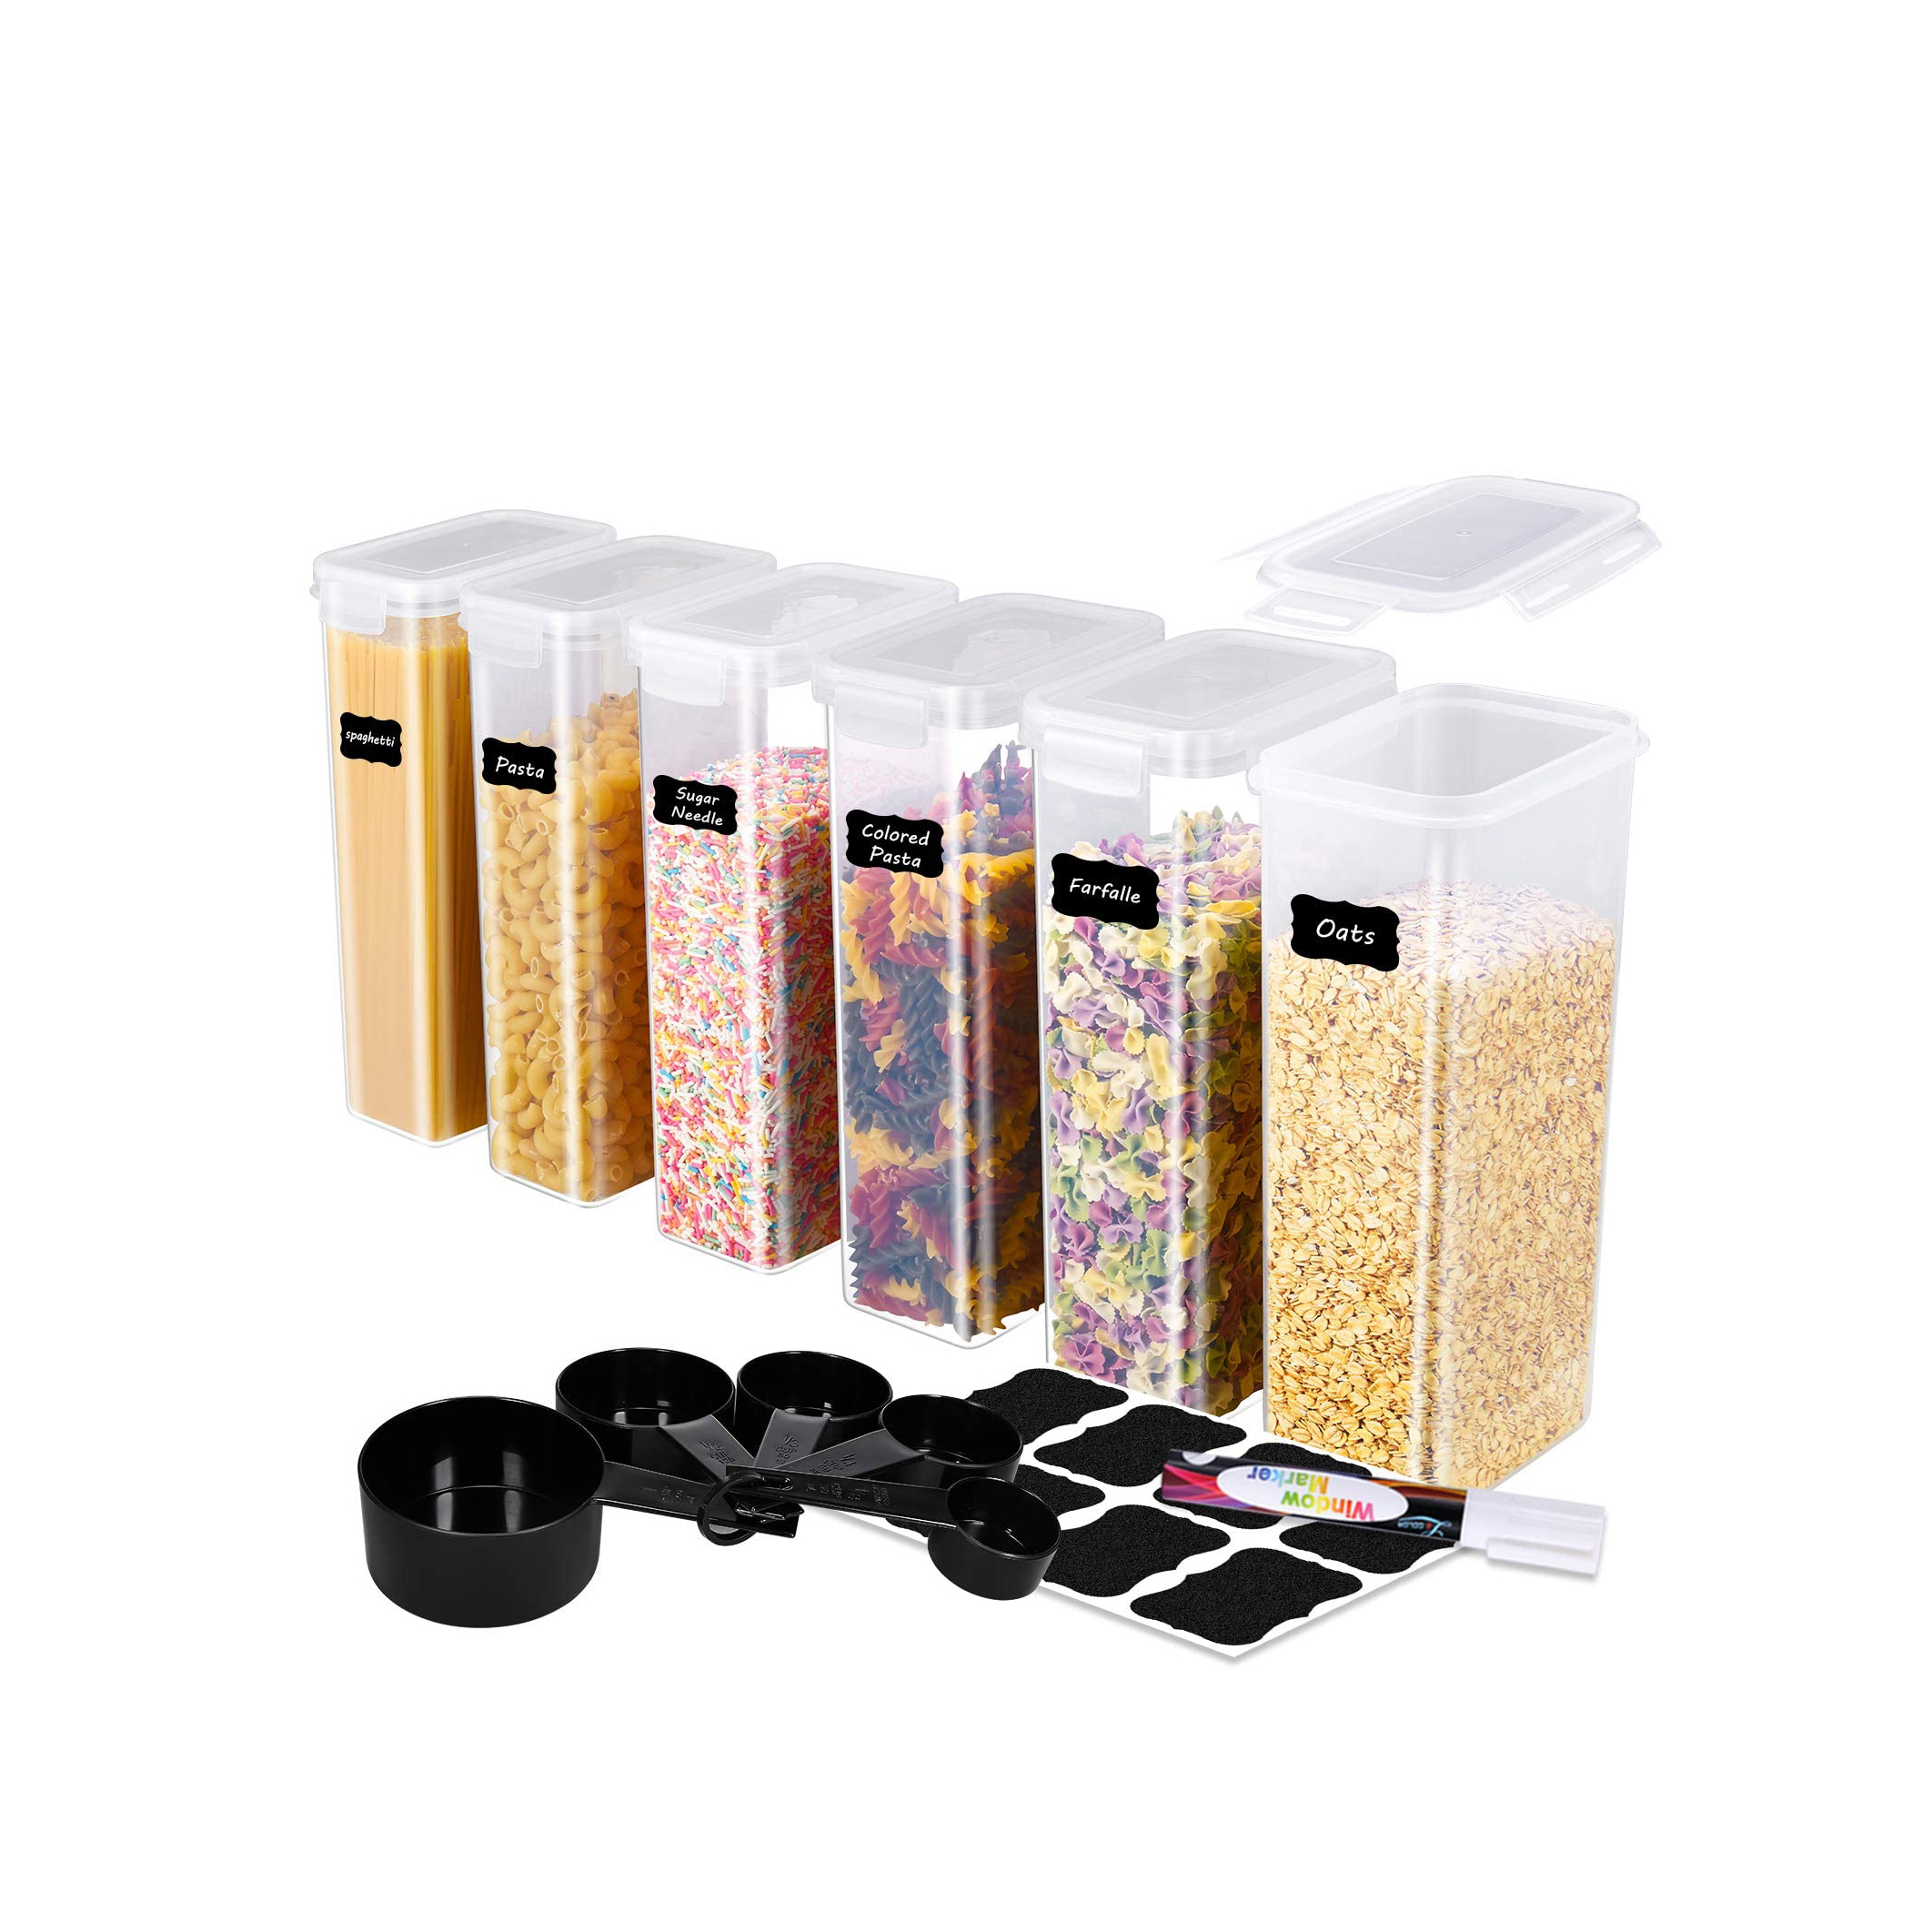 Pantry Food Storage Containers - Buy plastic food storage containers